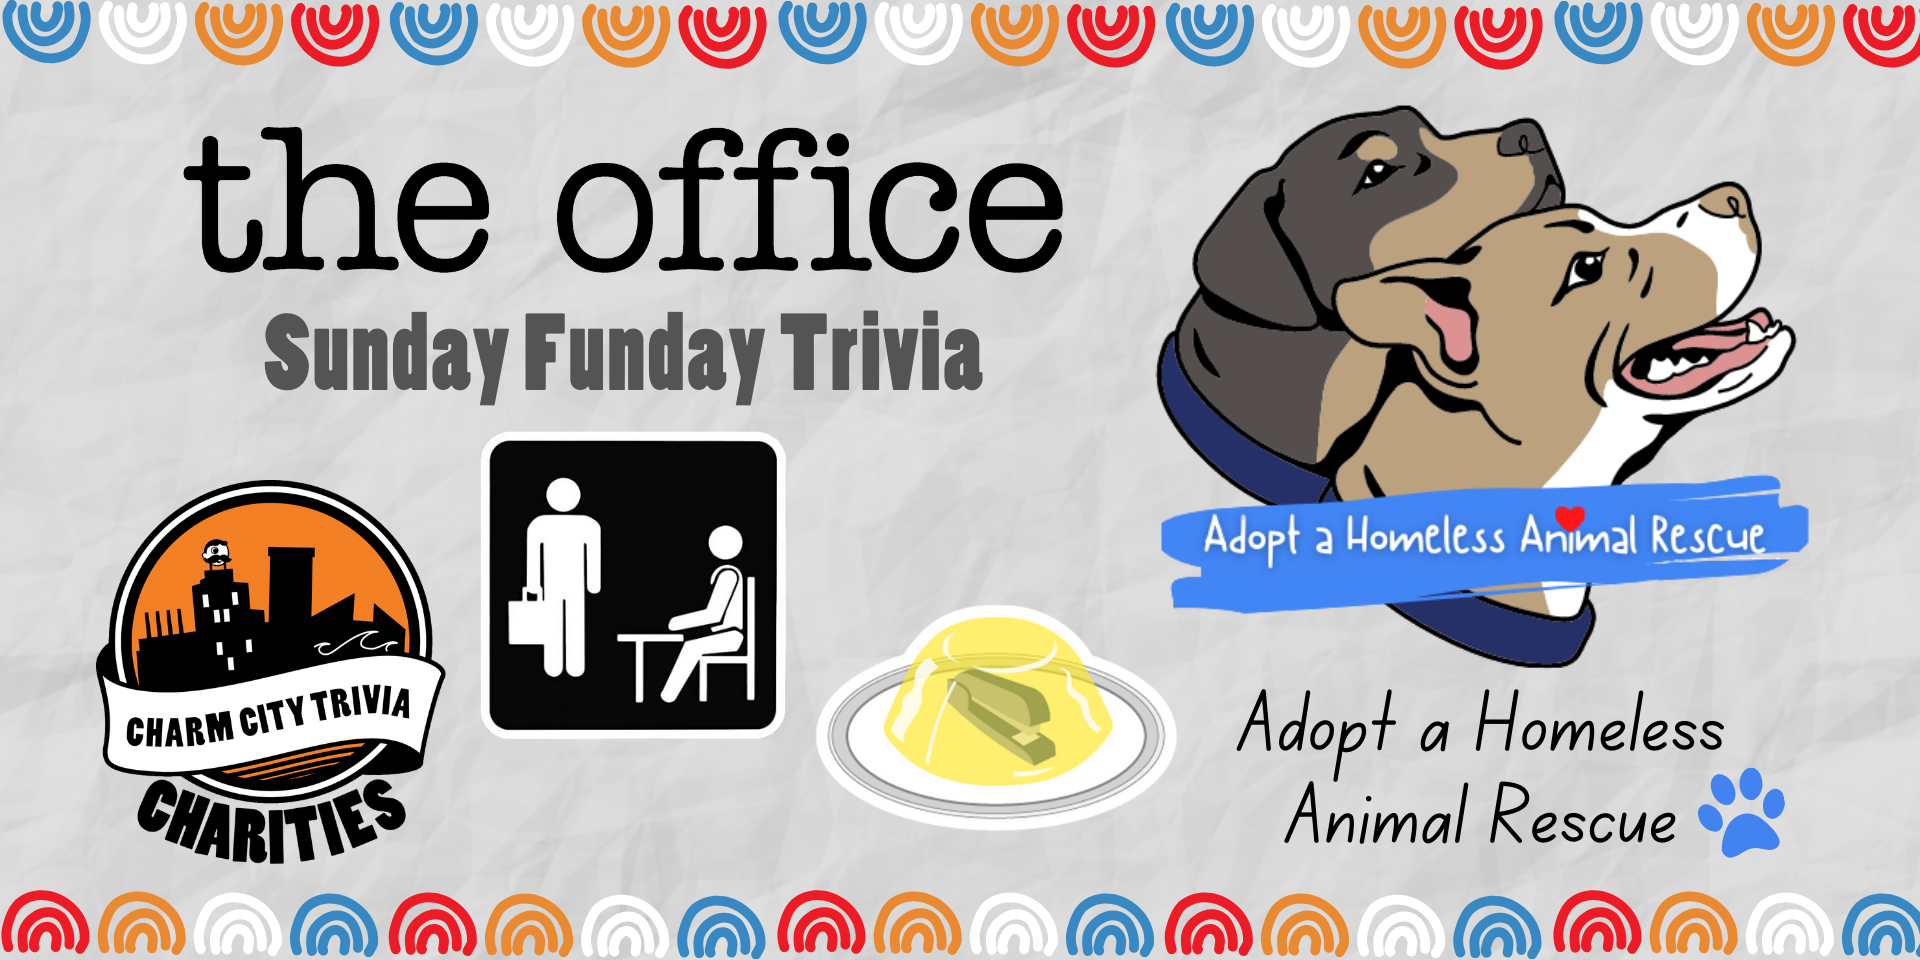 a light gray, paper textured background with a colorful border, the Charm City Trivia Charities logo, the Adopt a Homeless Animal Rescue logo, The Office logo, a stapler in jello, The Office placard, and dark gray text. The text reads: Sunday Funday Trivia